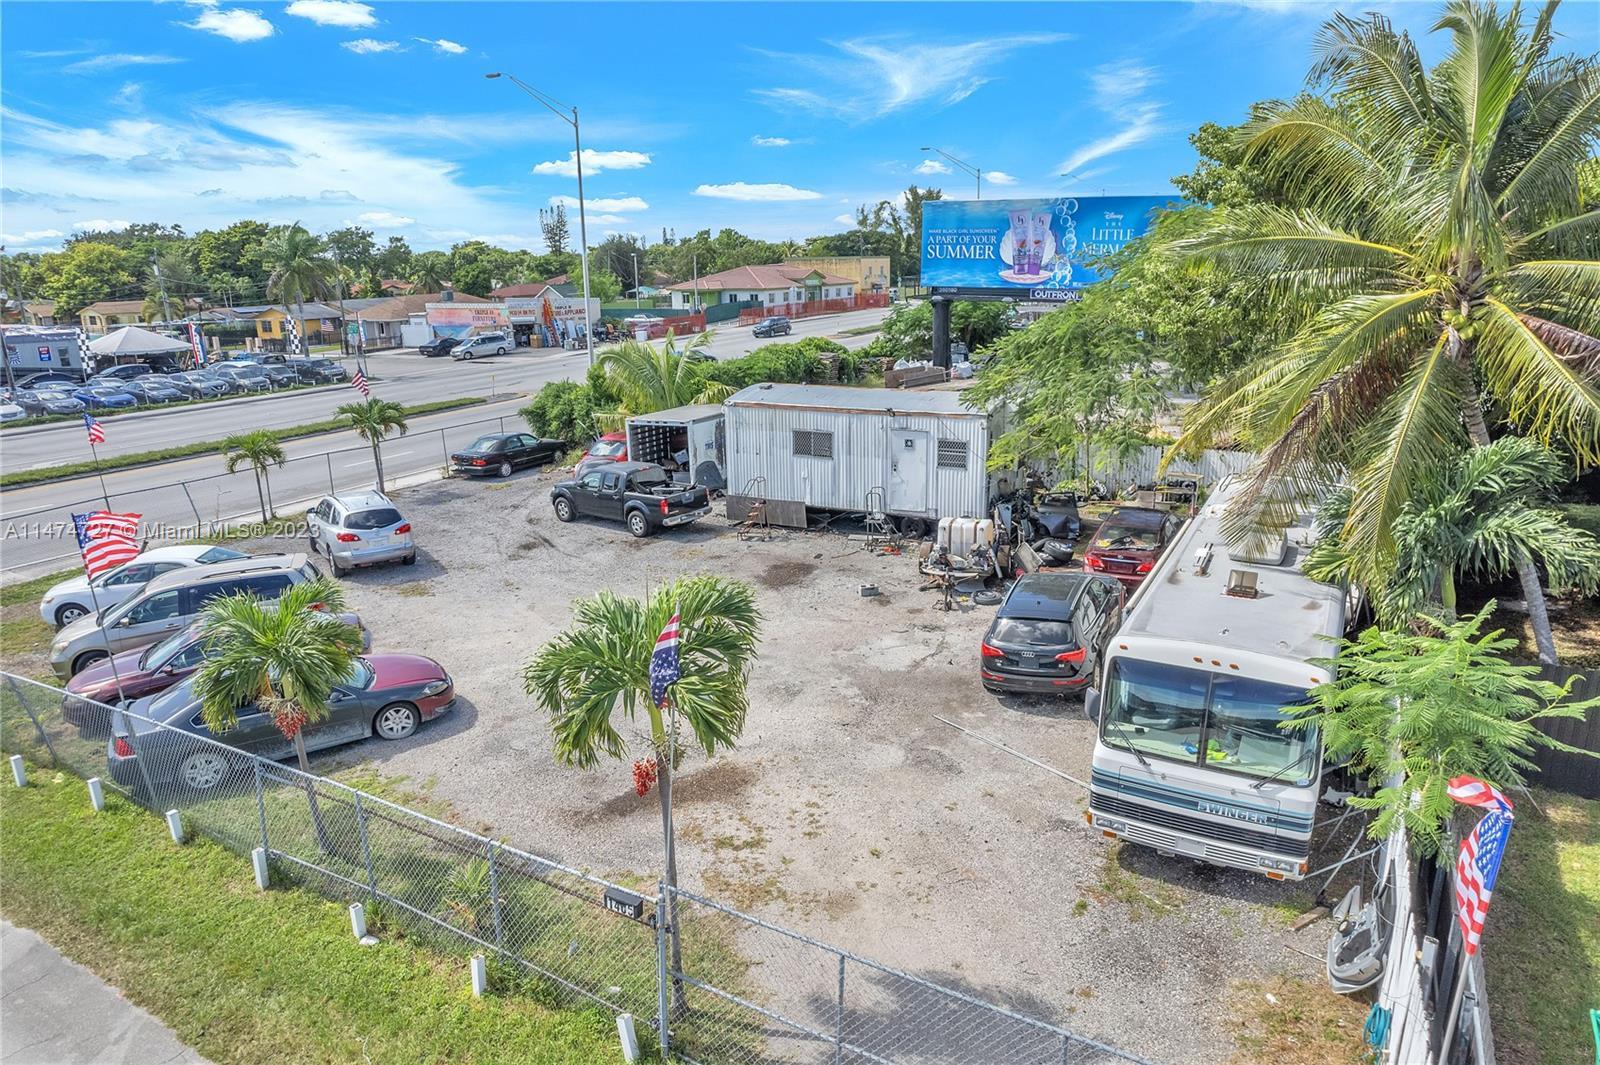 Photo of 1405 NW 79th St in Miami, FL